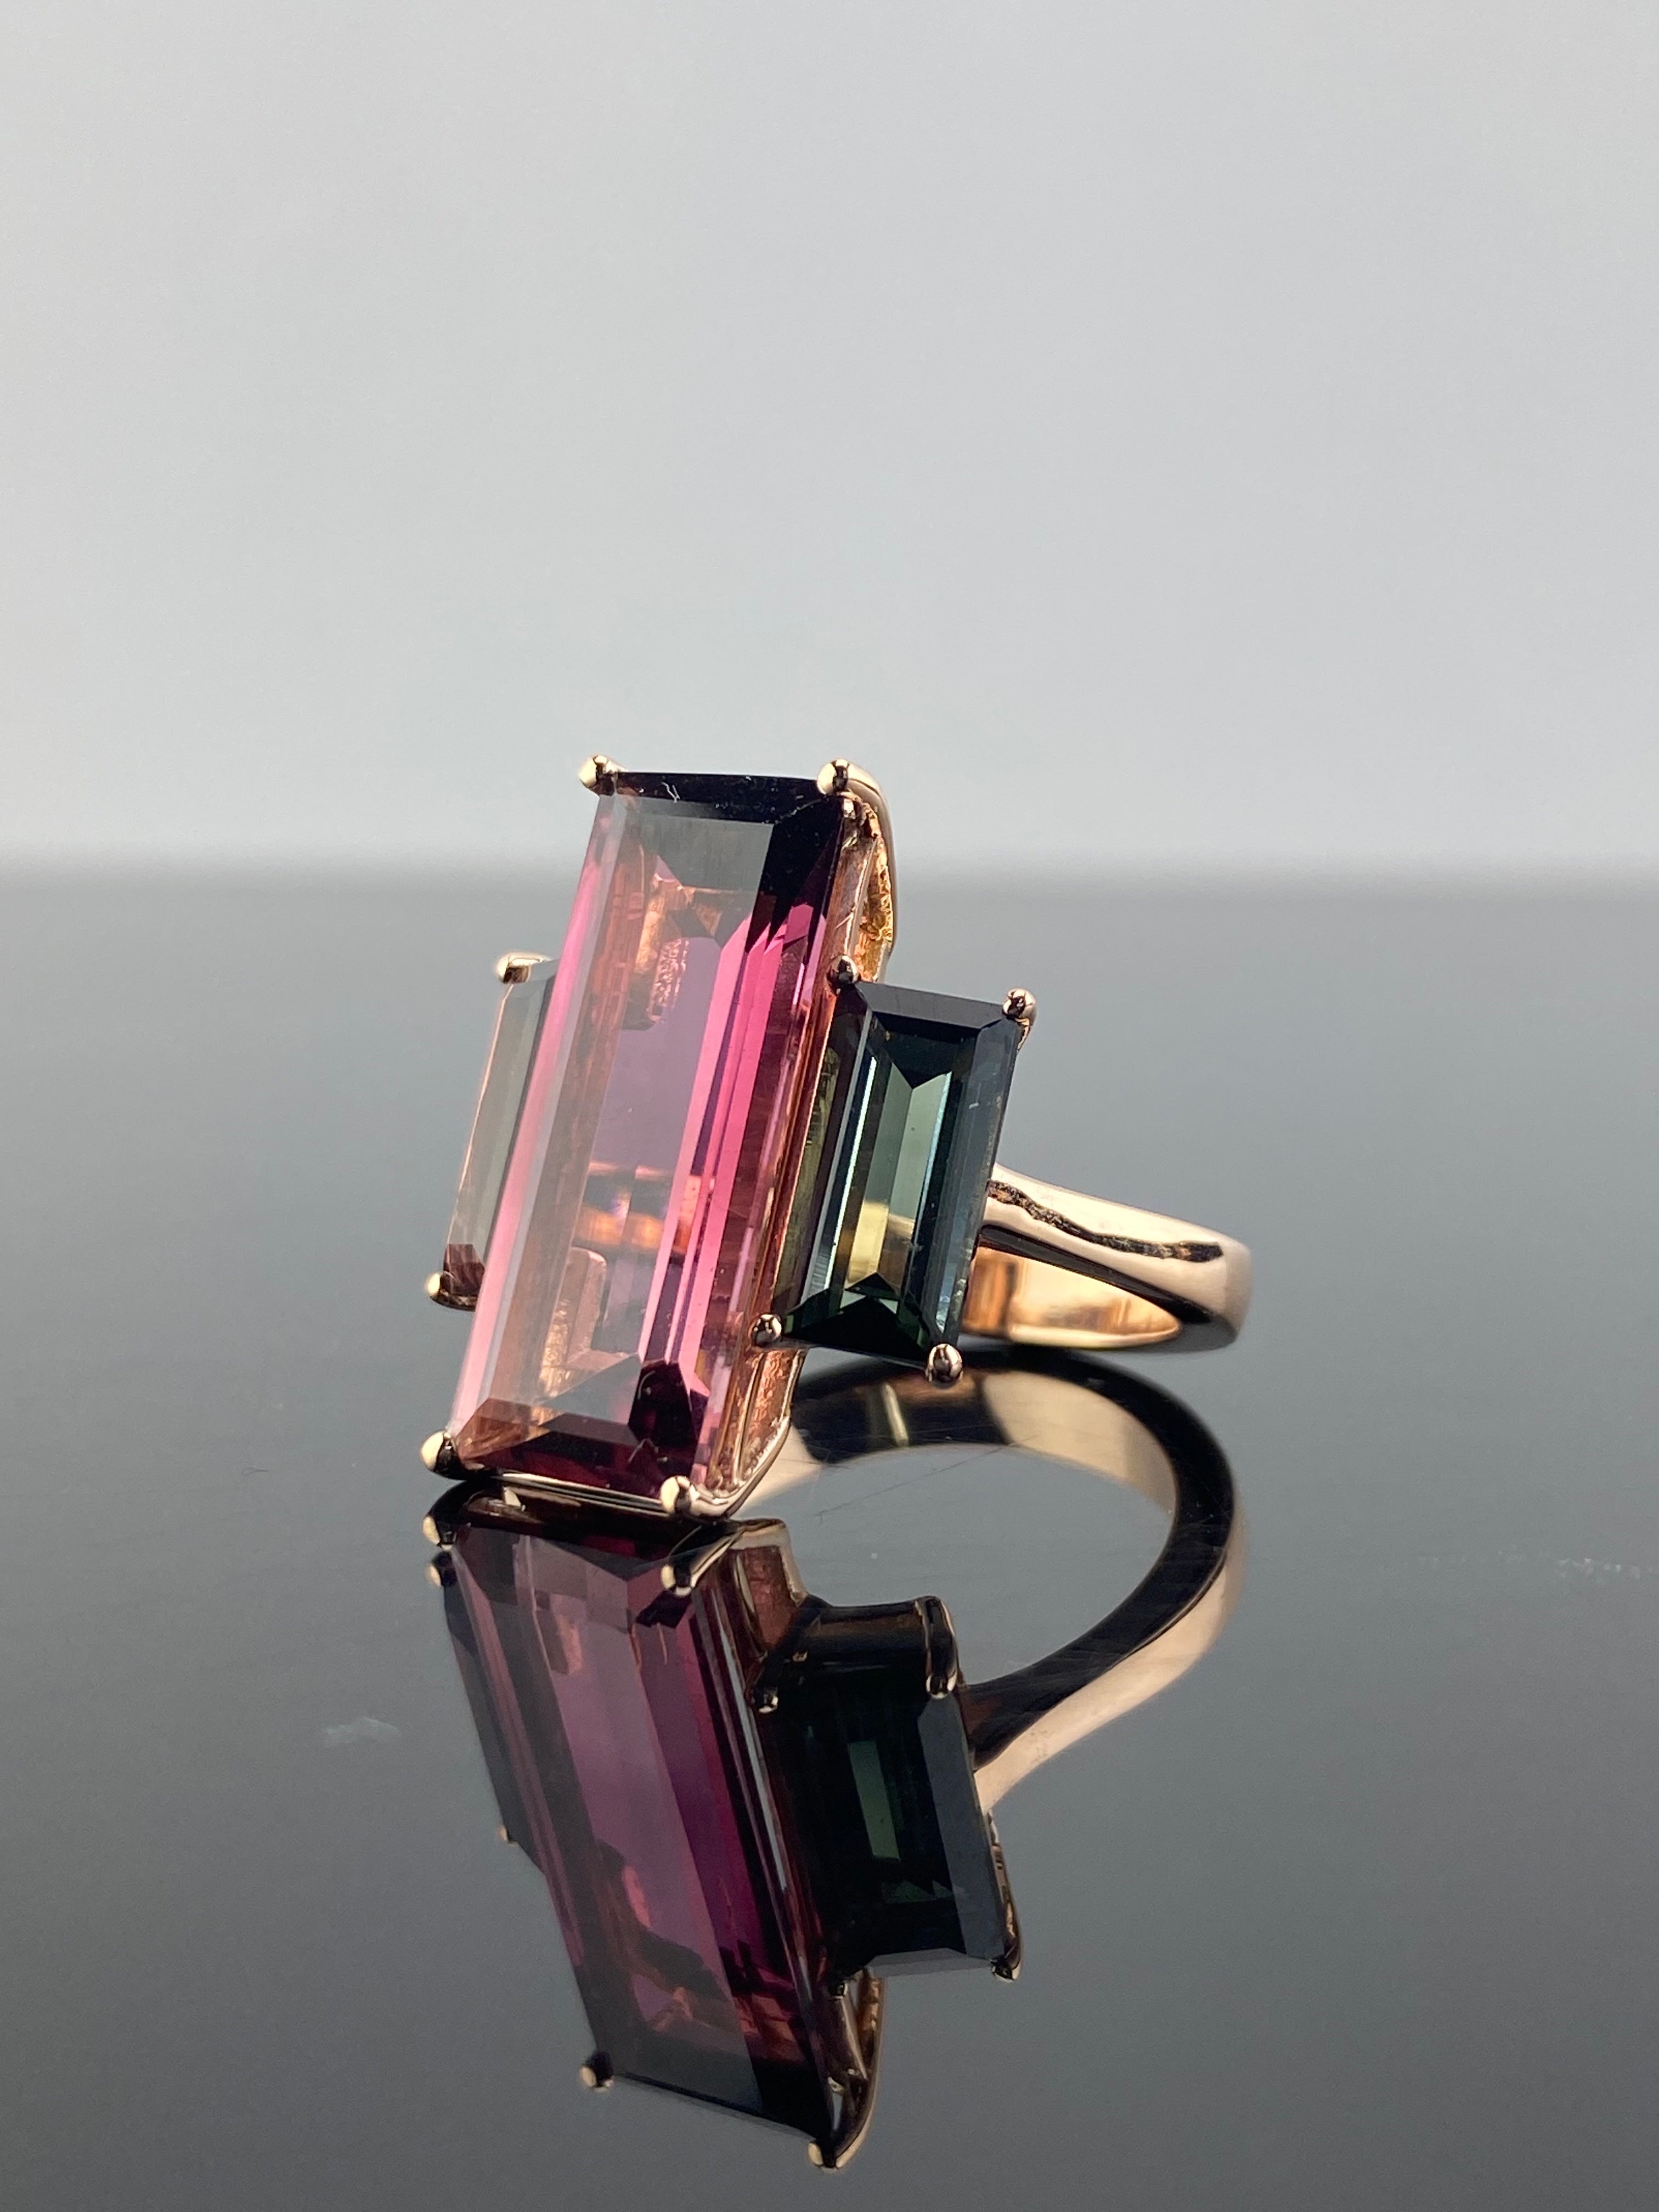 an eye-catching 7.83 carat Pink Tourmaline center stone, with 3.03 carat Green and Brown Tourmaline side stones. The Emerald cut Tourmalines are absolutely natural with no inclusions and great color, and are set in solid 18K Rose Gold. The ring is